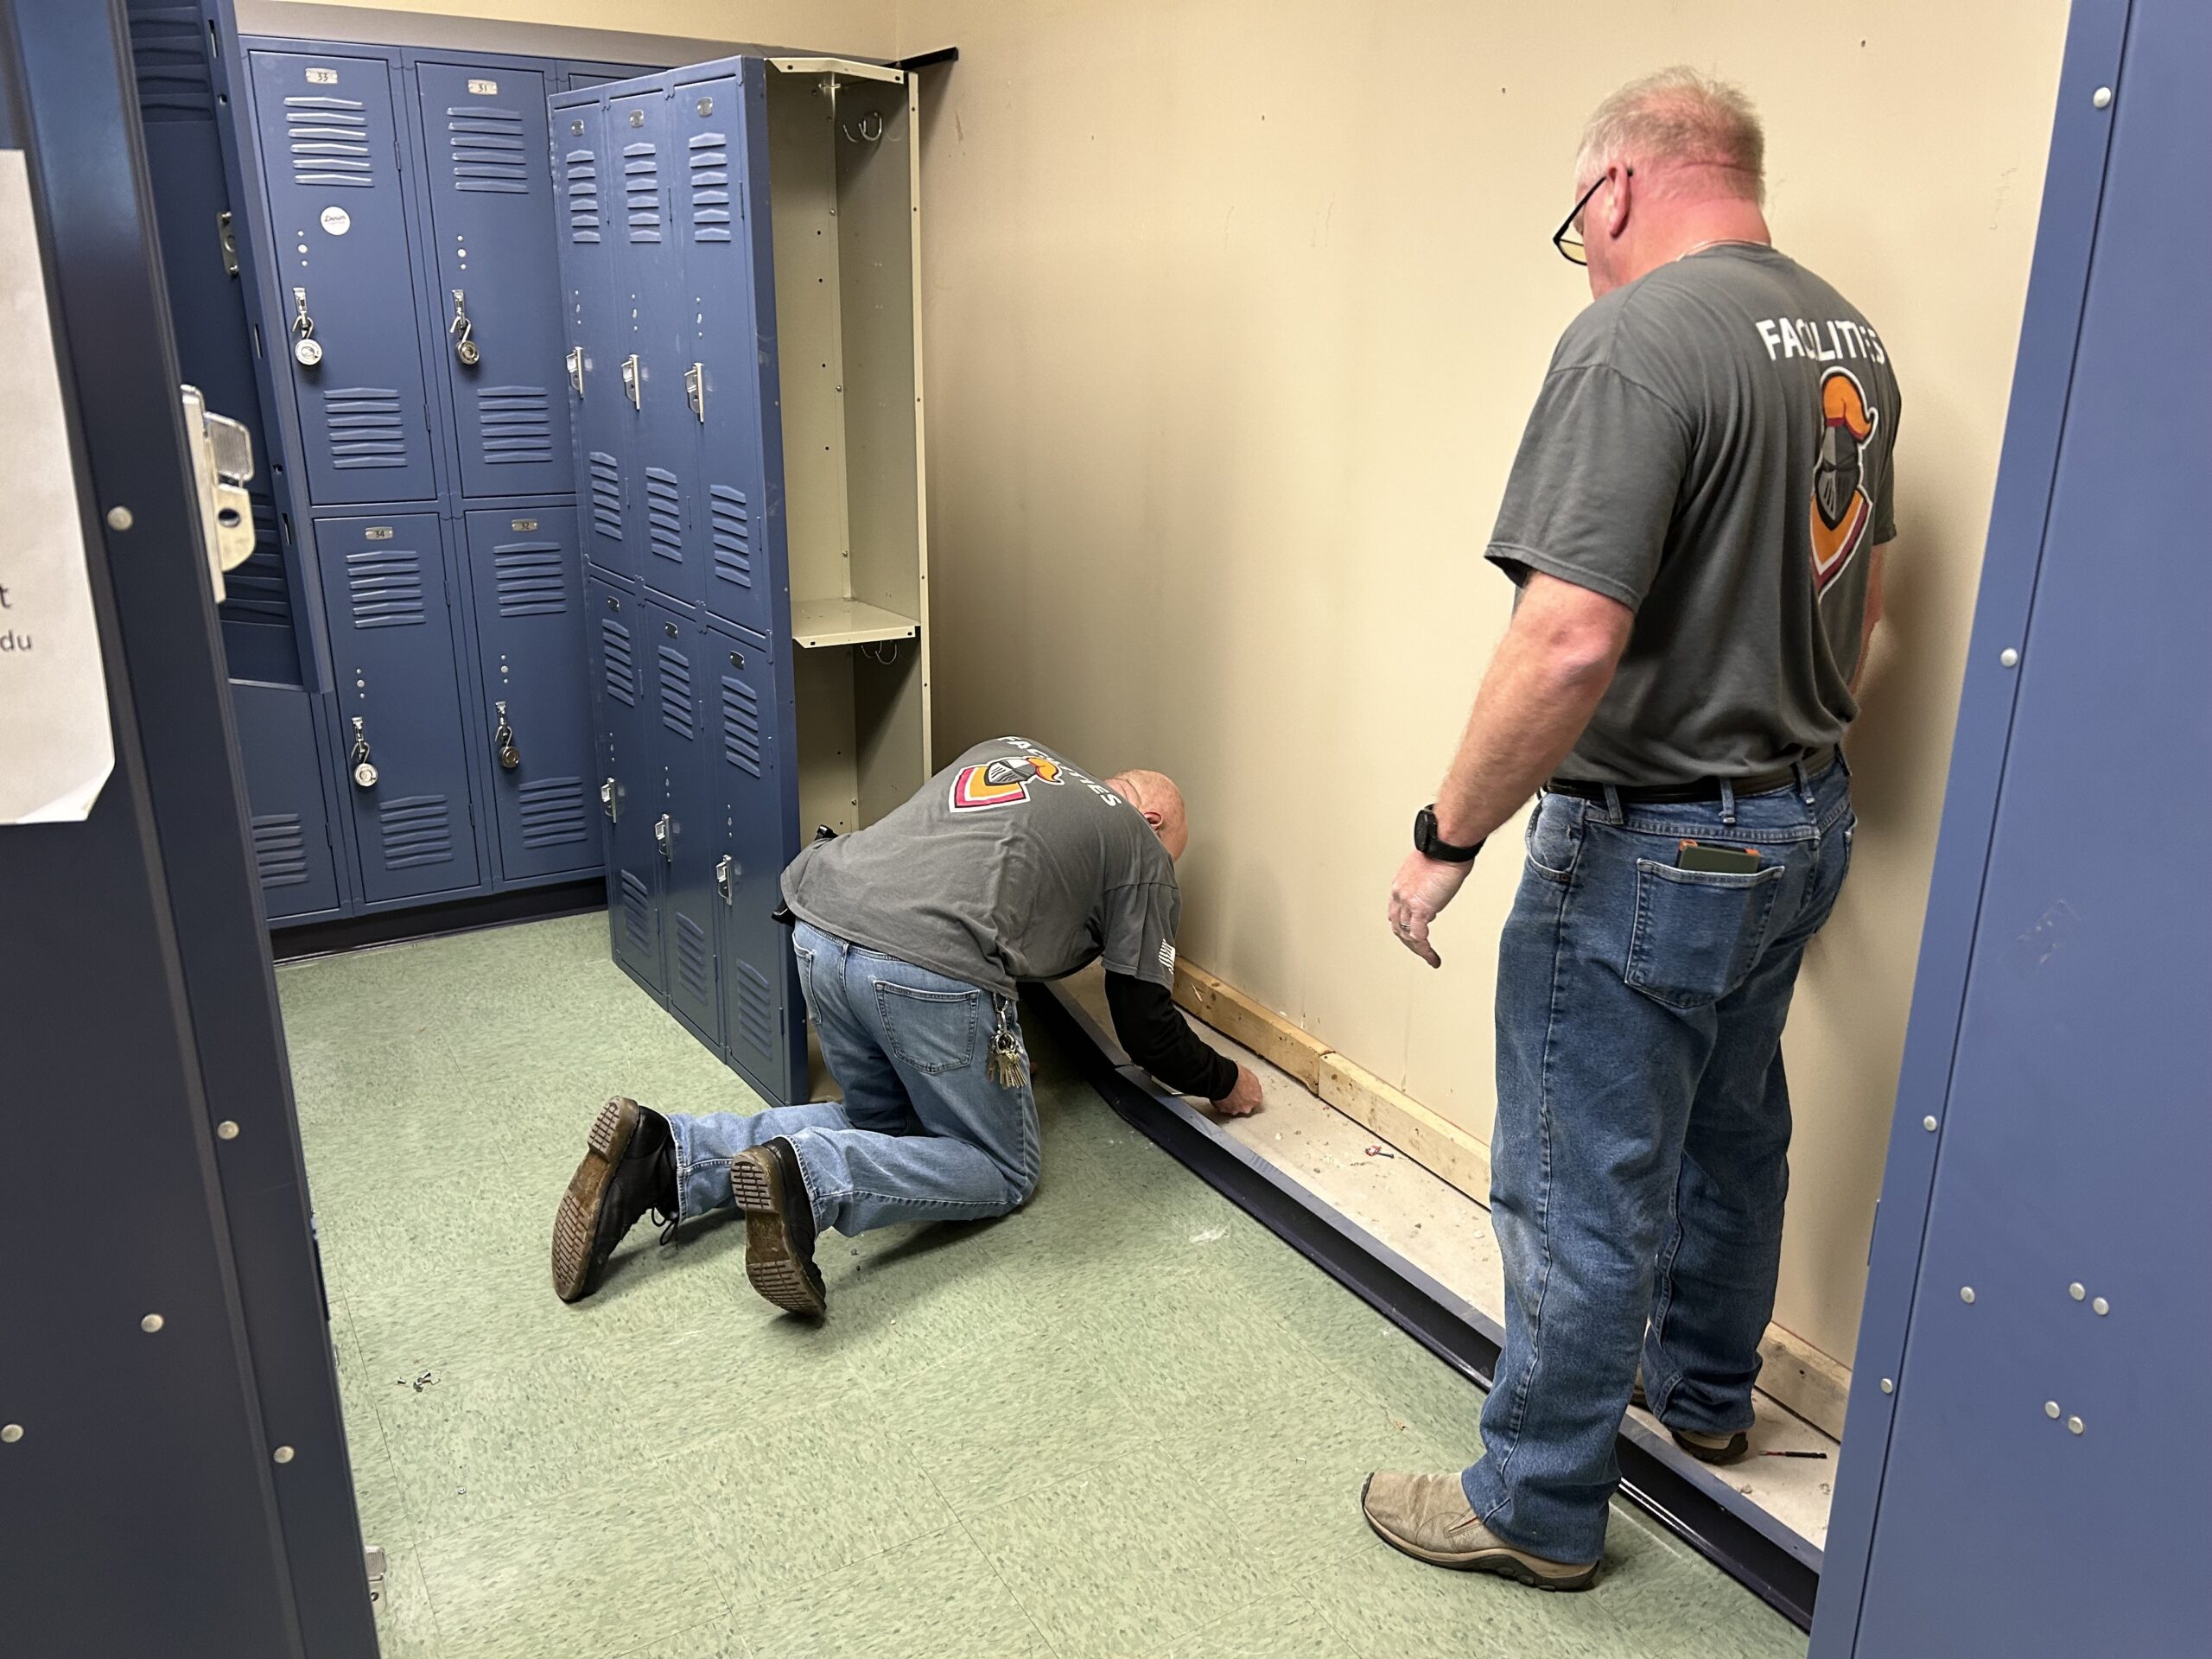 Two men in gray T-shirts and blue jeans working in a room removing double-stacked blue steel lockers.